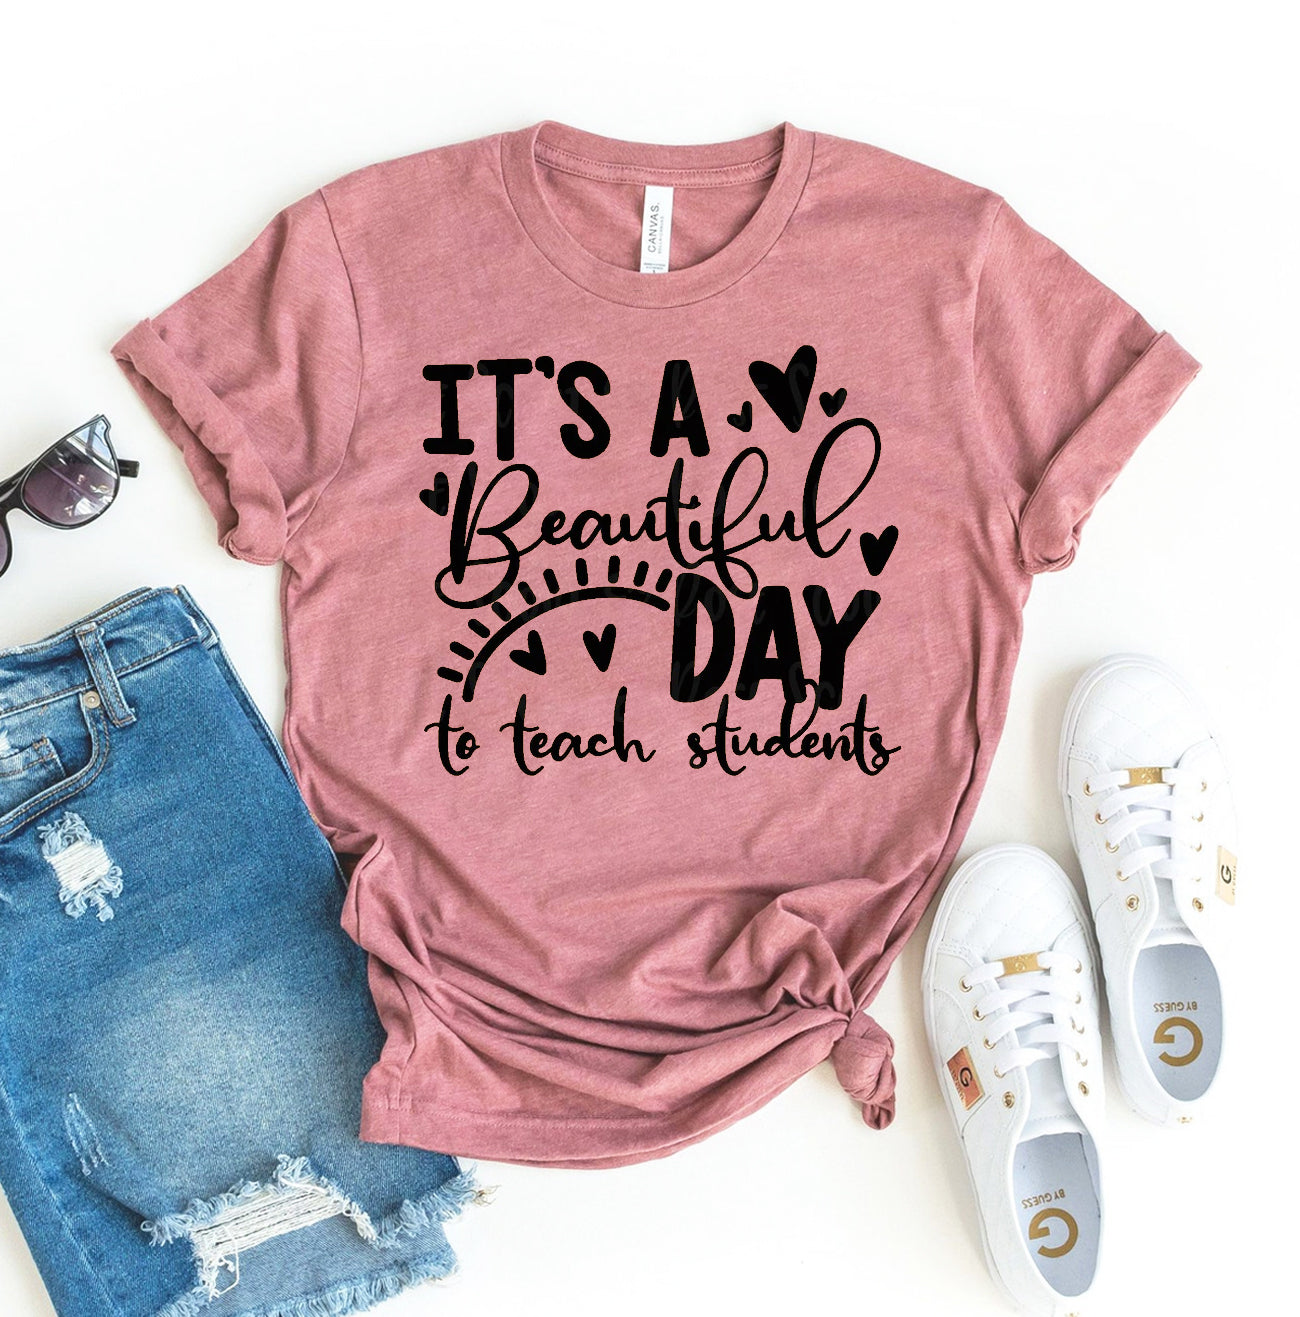 It's A Beautiful Day To Teach Students T-shirt